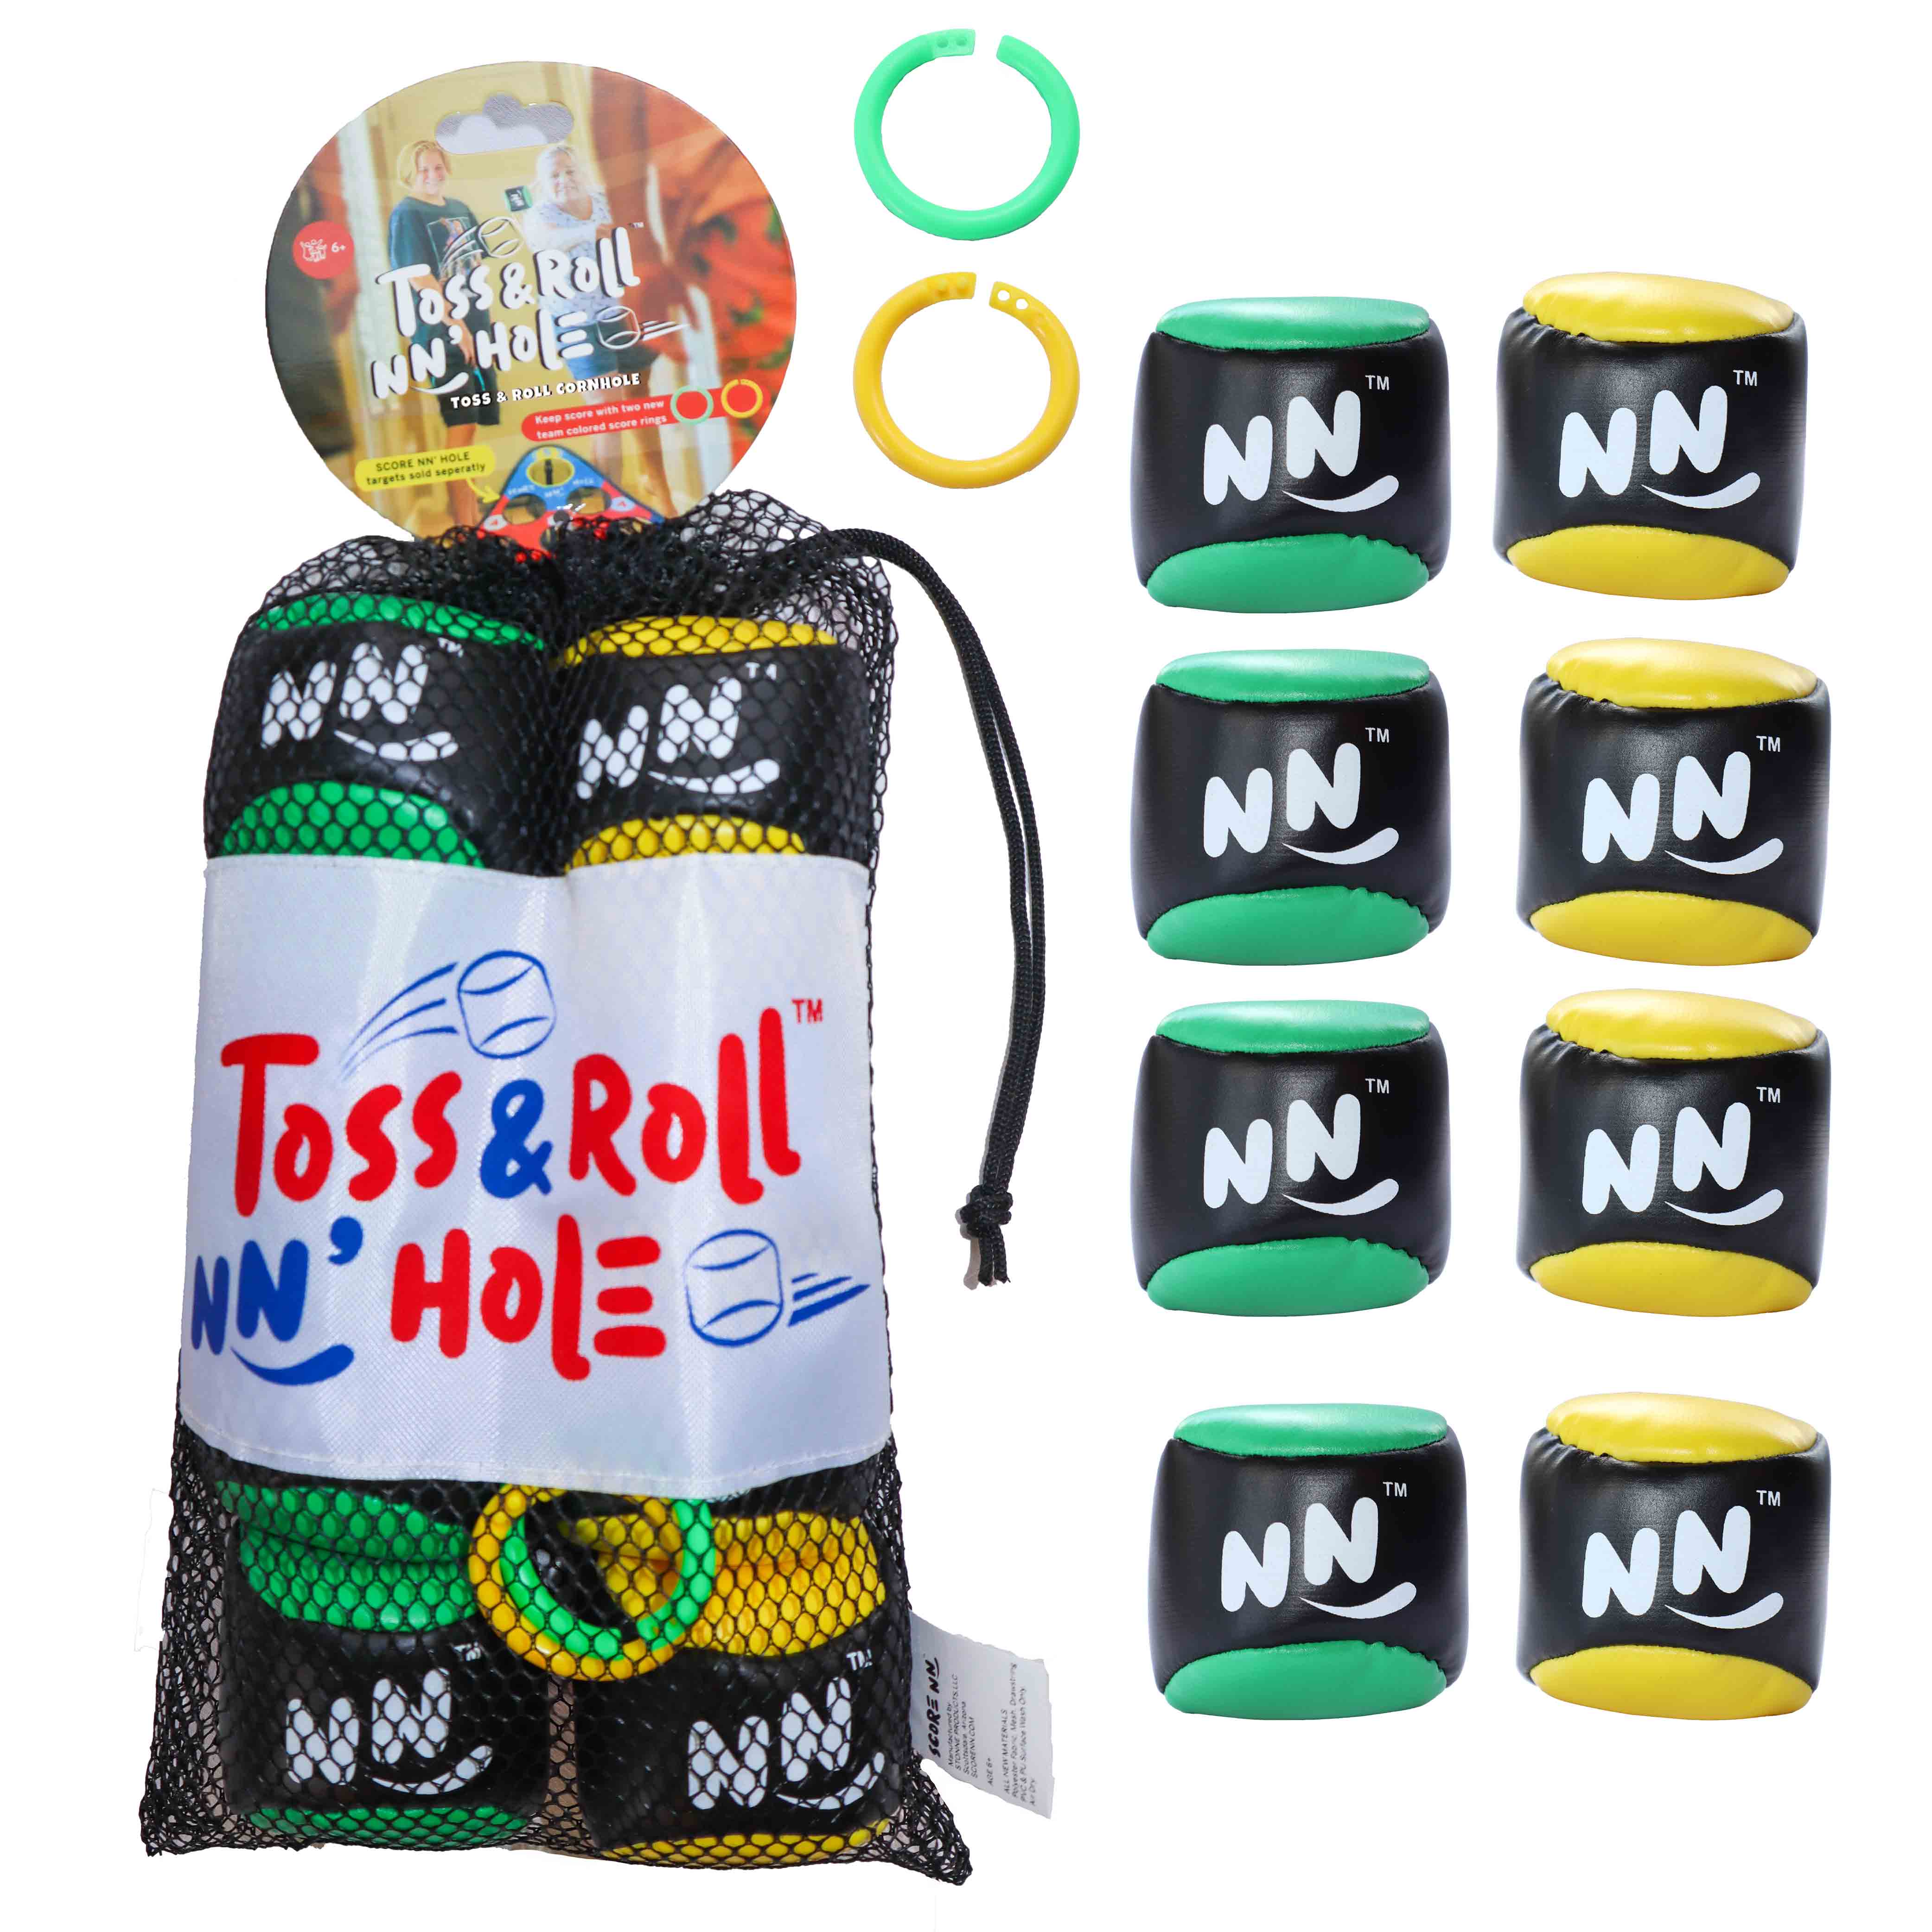 TOSS & ROLL NN' HOLE GAME MODE | Targets NOT Included | ROLL NN' HOLE & Land and Water Cornhole